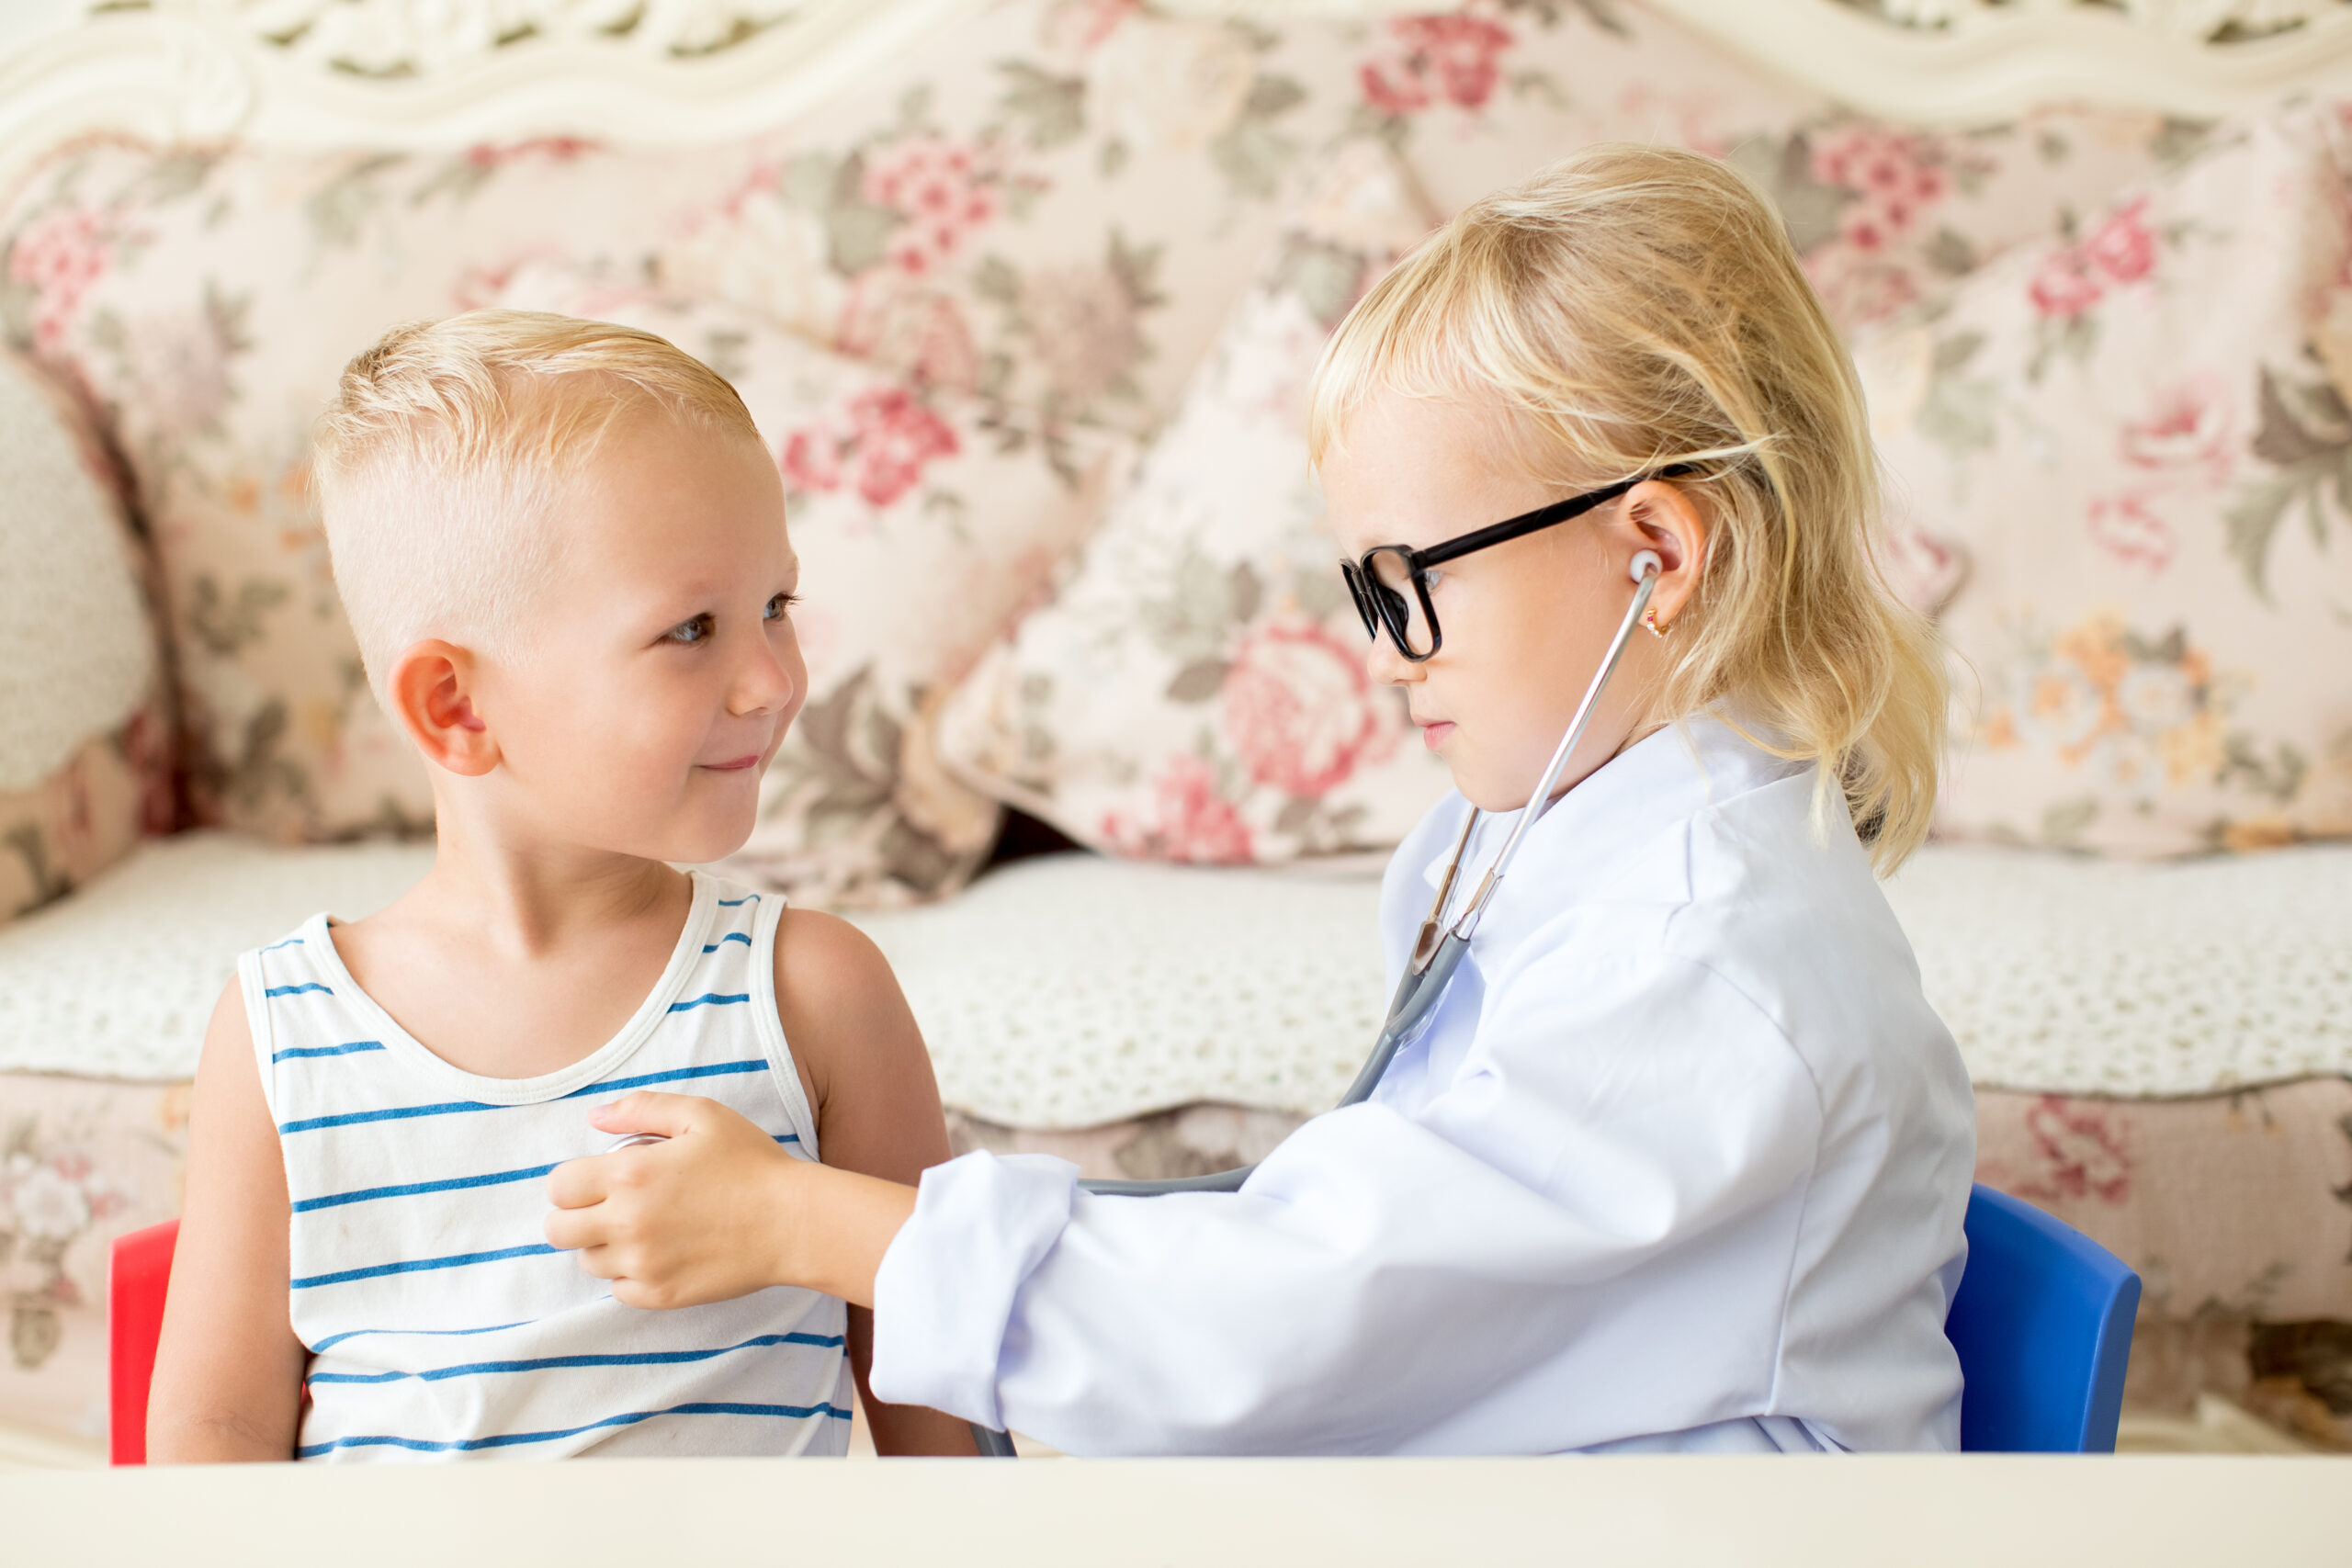 Portrait of serious little girl playing doctor examining boy patient with stethoscope. Occupation, health and childhood concept